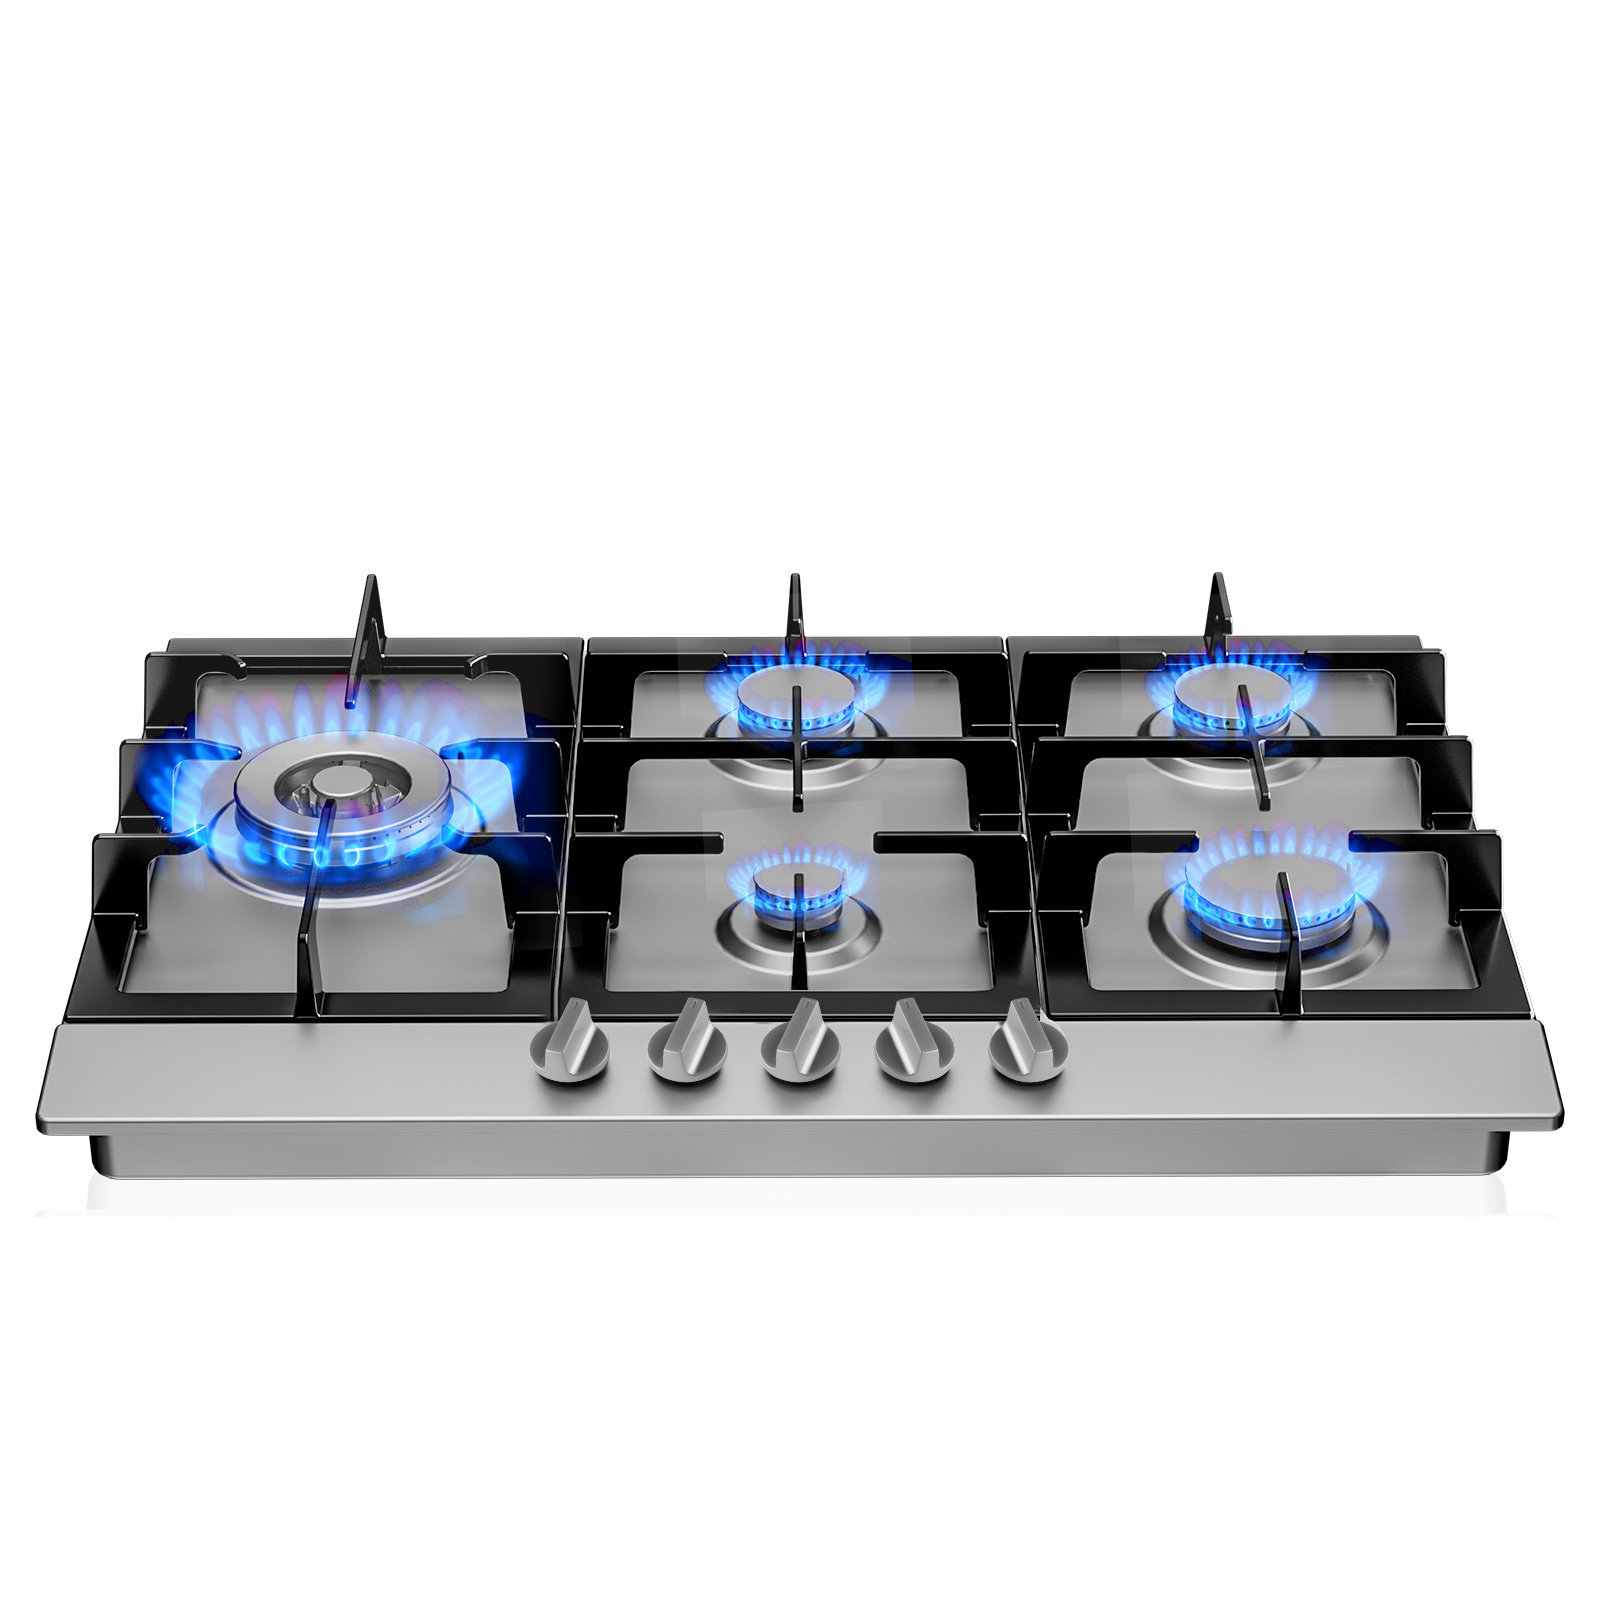 Home appliance cooktop gas 5 burner blue flame cast iron grill